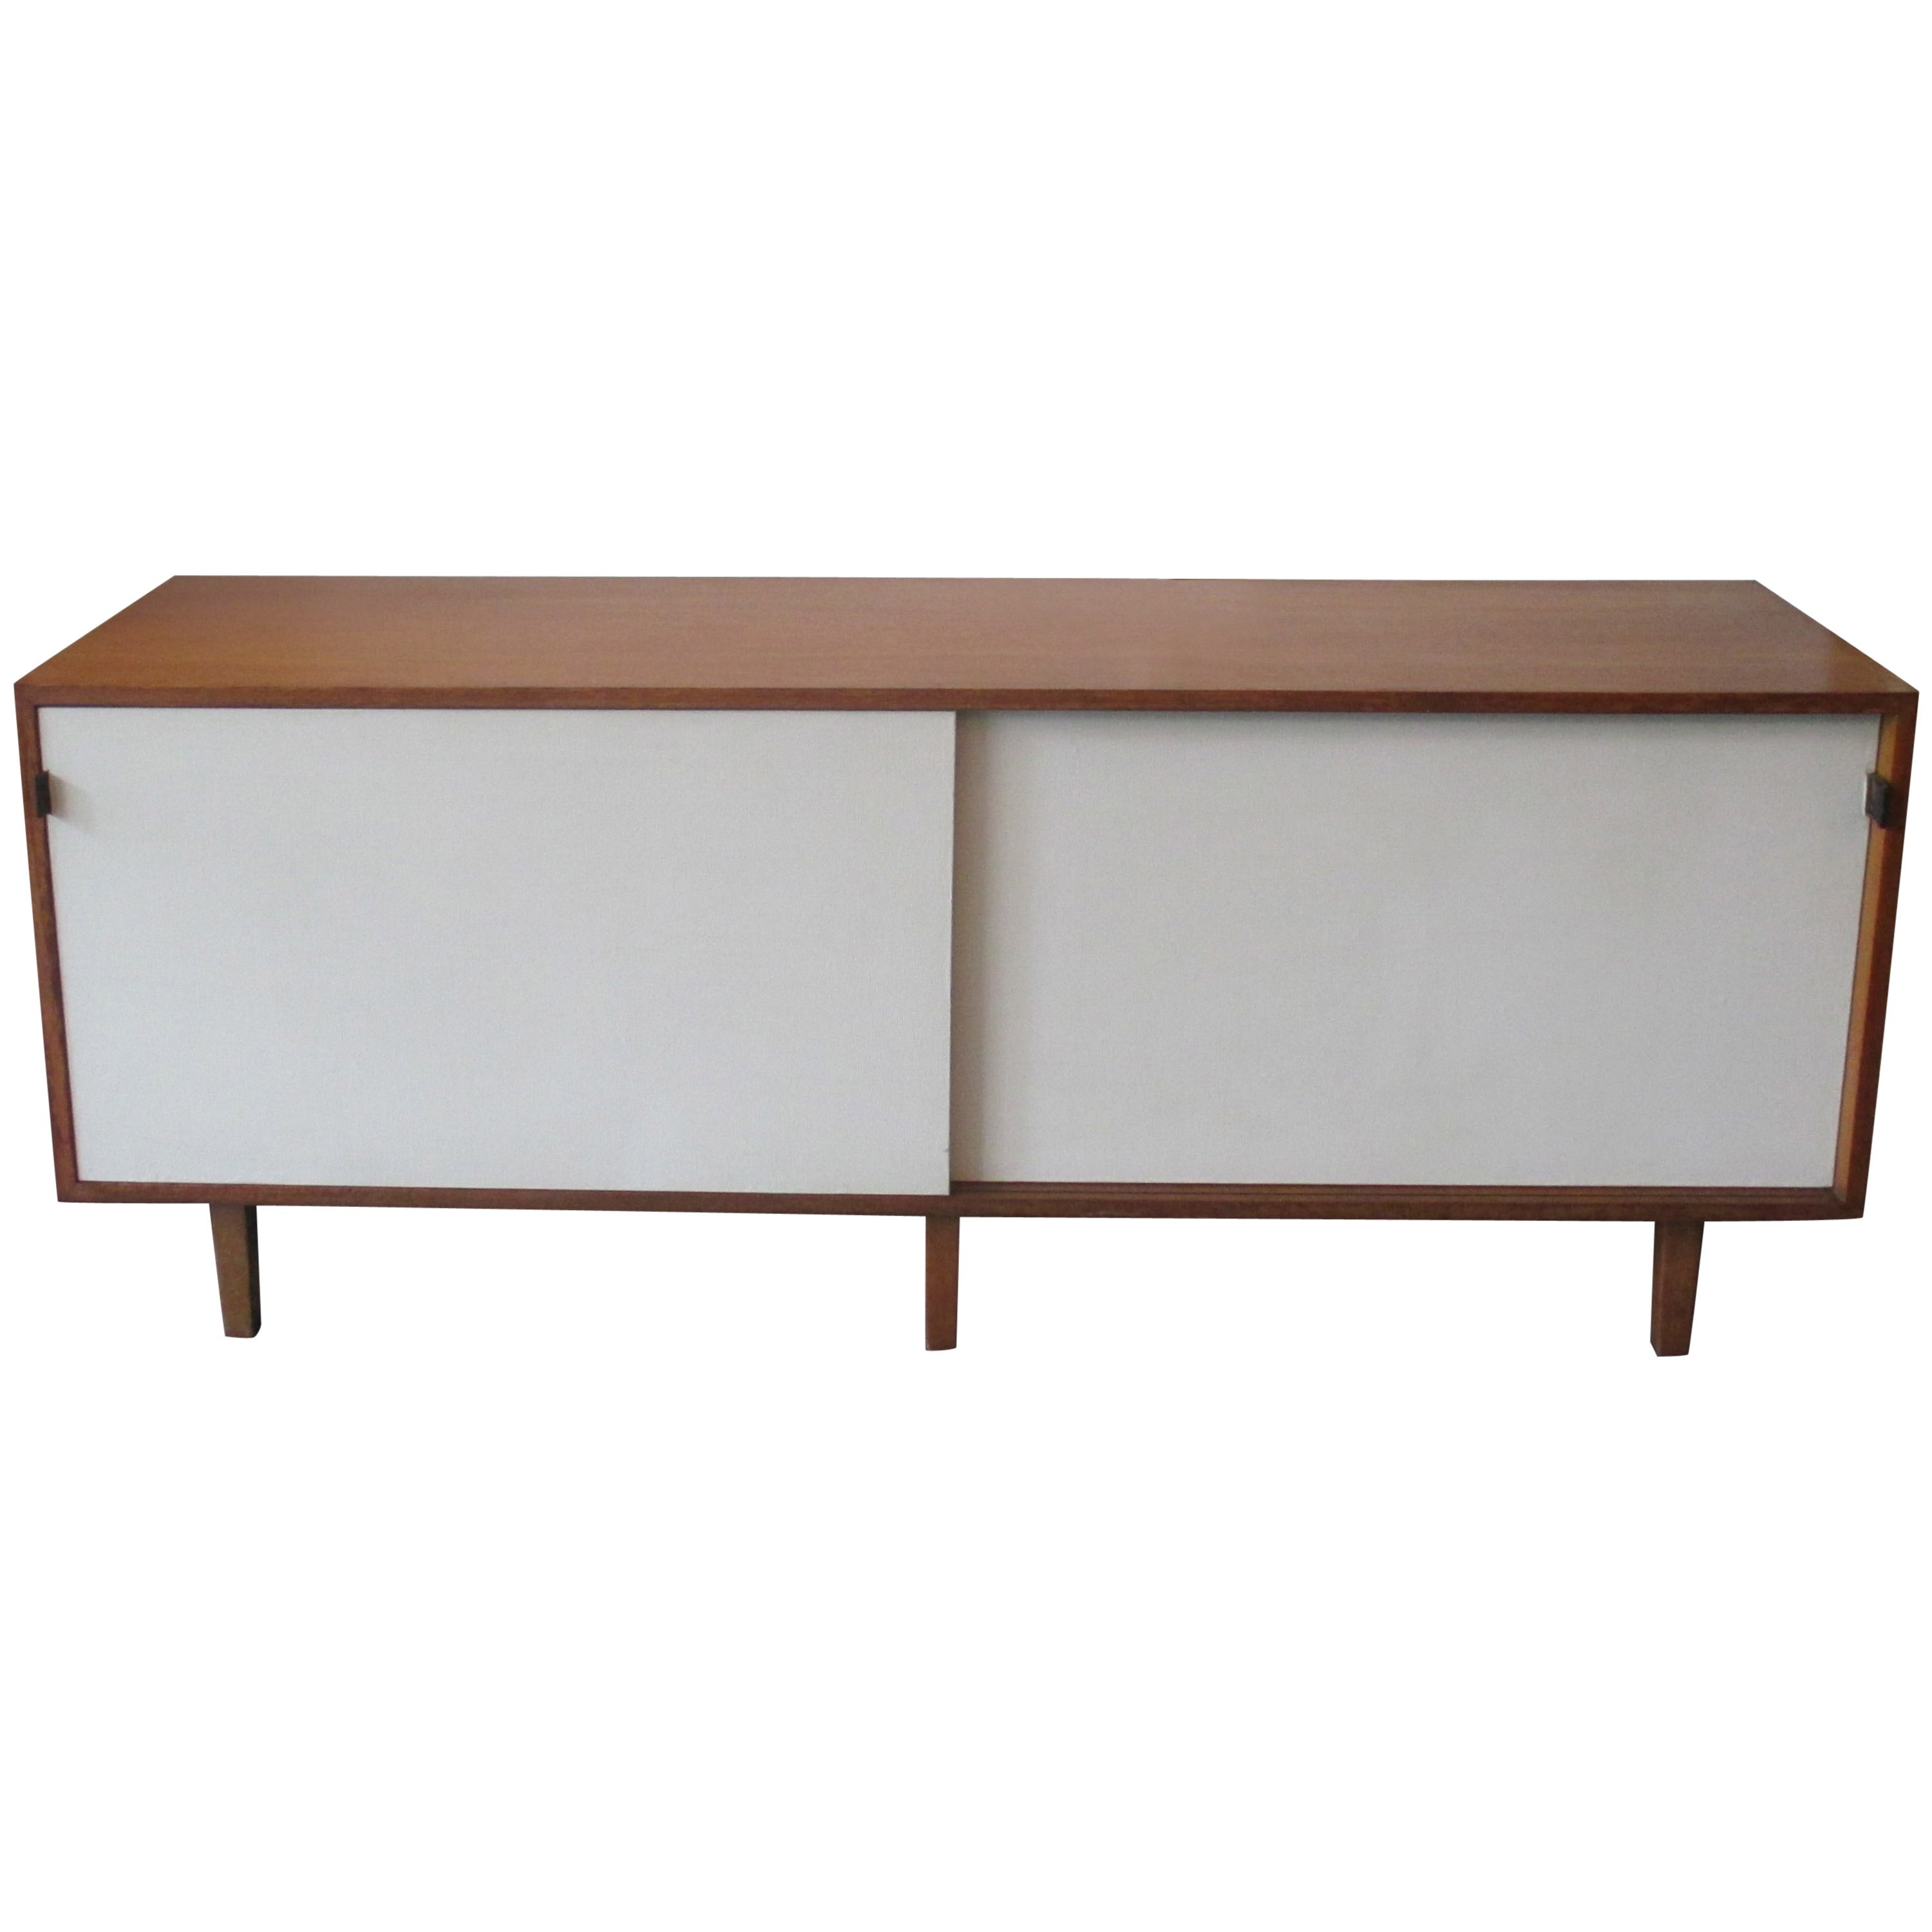 Early Florence Knoll Credenza